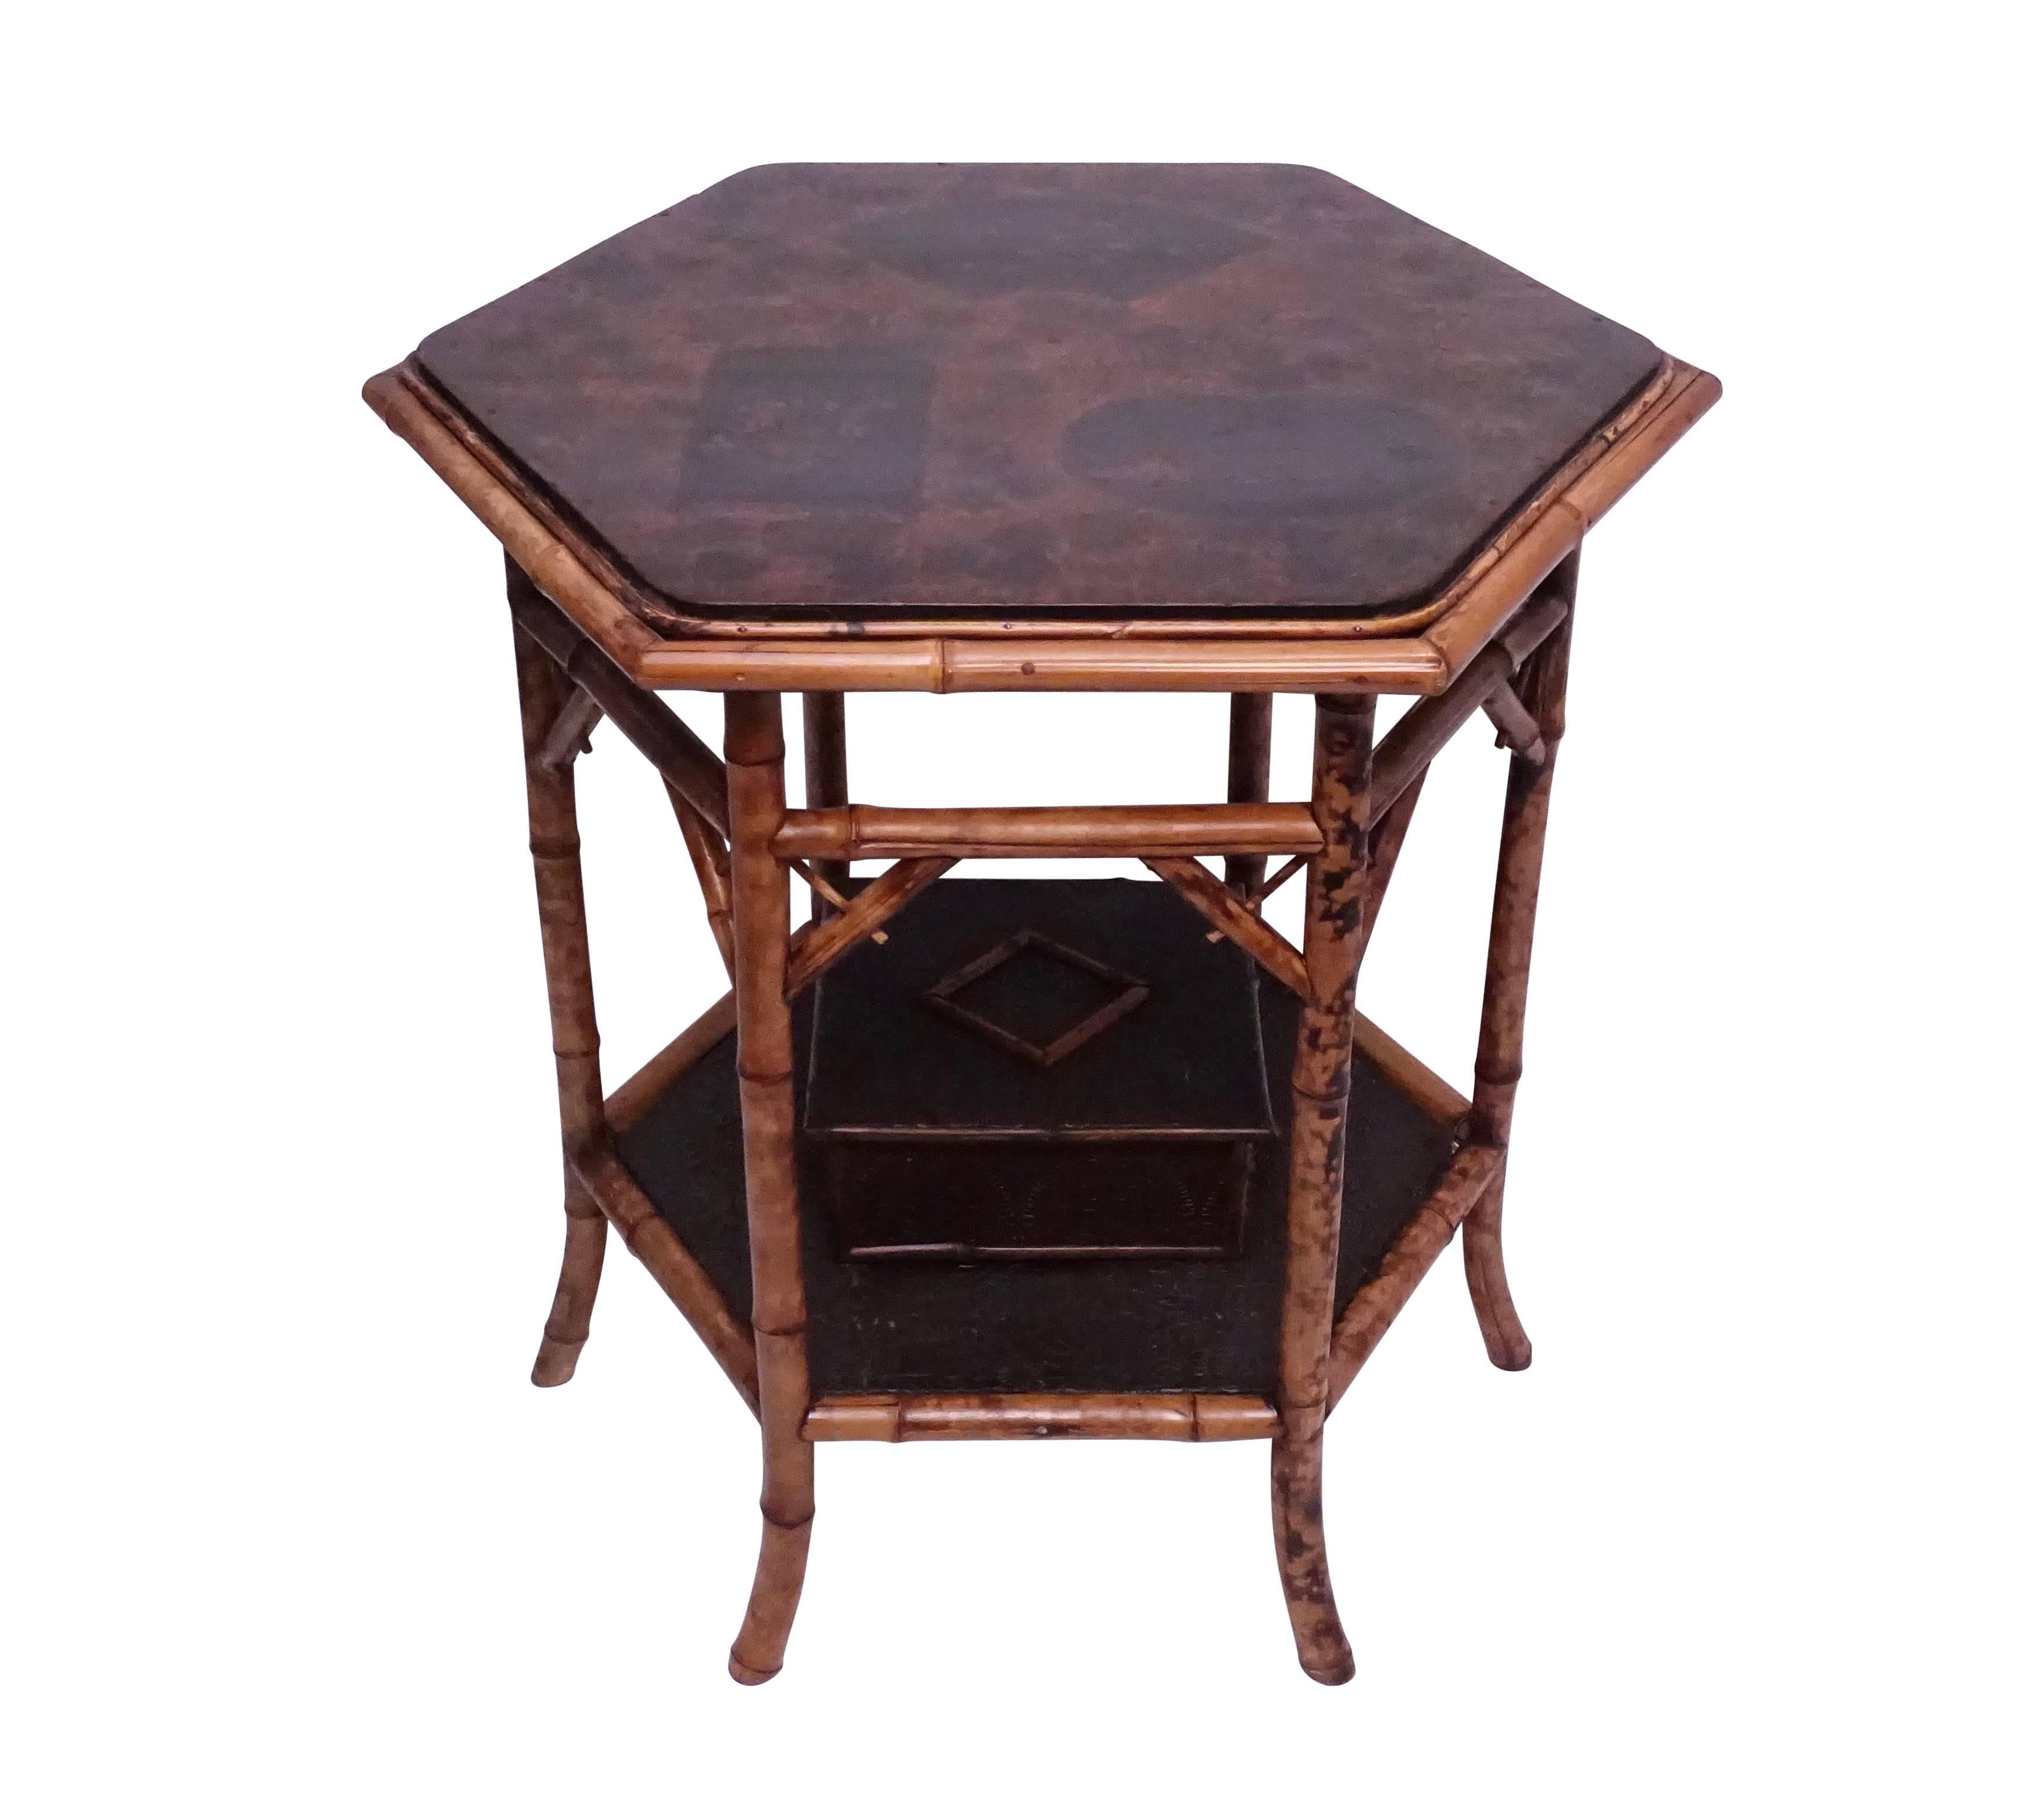 Highly unusual octagonal shape bamboo table with lacquered top and having a lower shelf with an affixed box. The top has three geometrical shapes with scenes of mountains, birds and flowers, the lower shelf and box with embossed brown paper board,